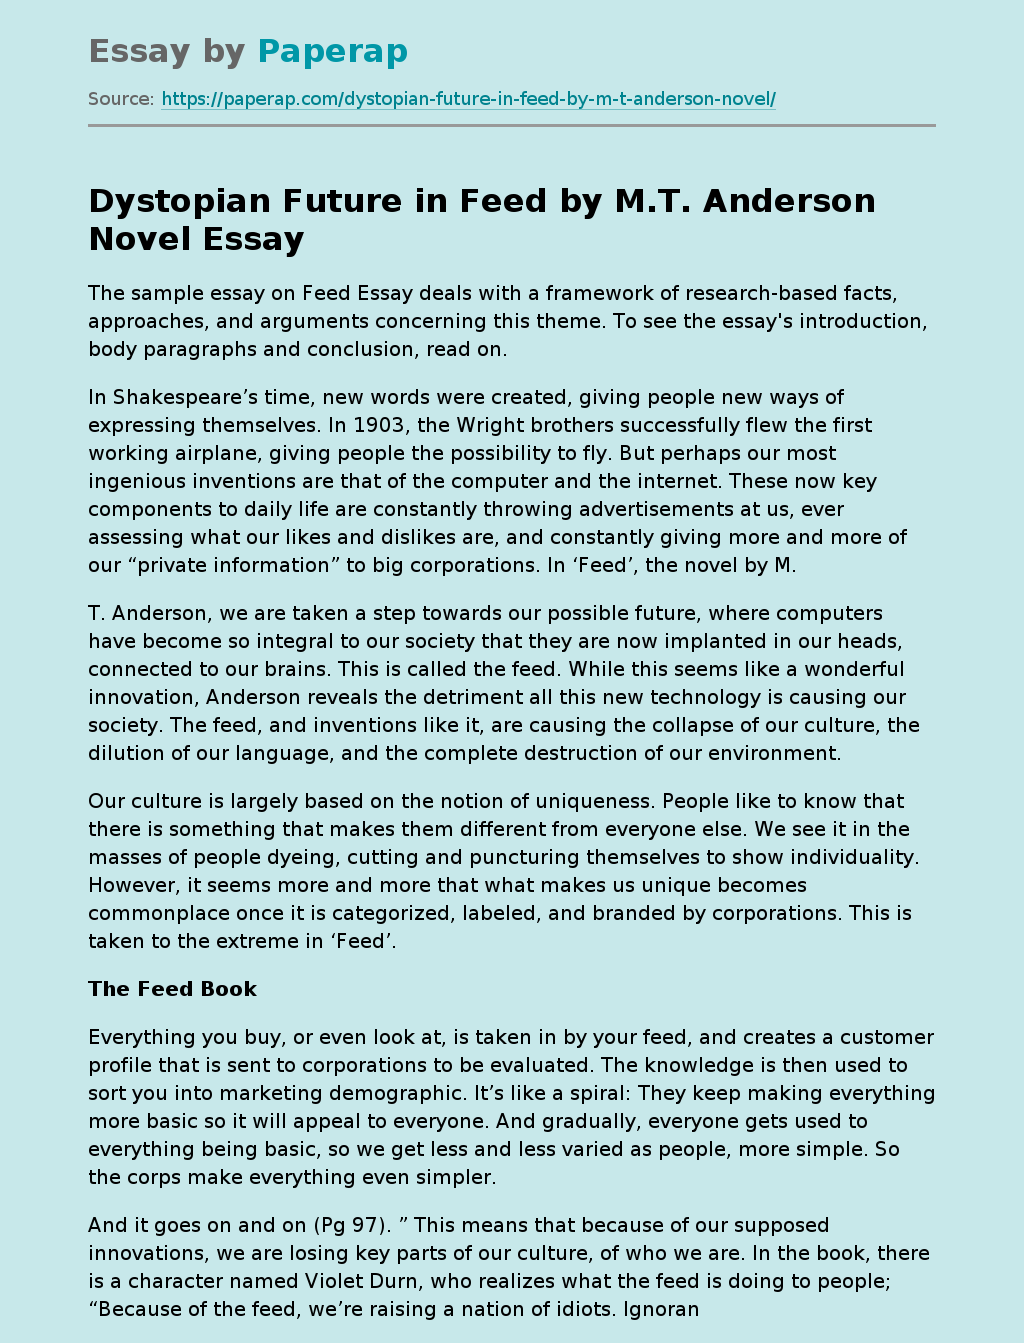 Dystopian Future in Feed by M.T. Anderson Novel